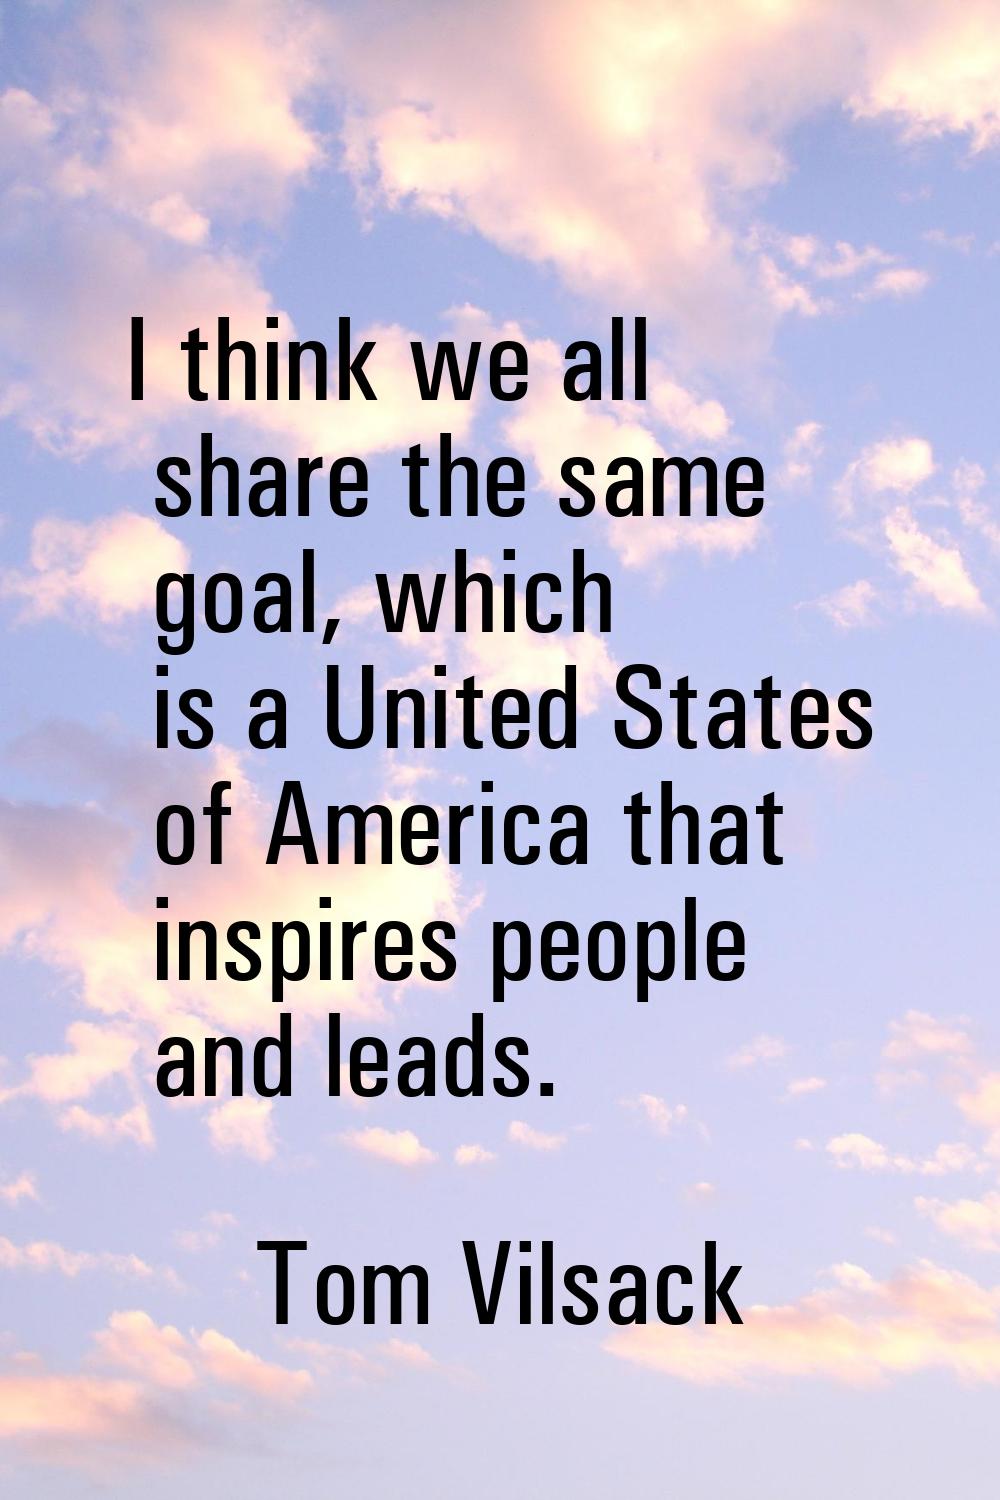 I think we all share the same goal, which is a United States of America that inspires people and le